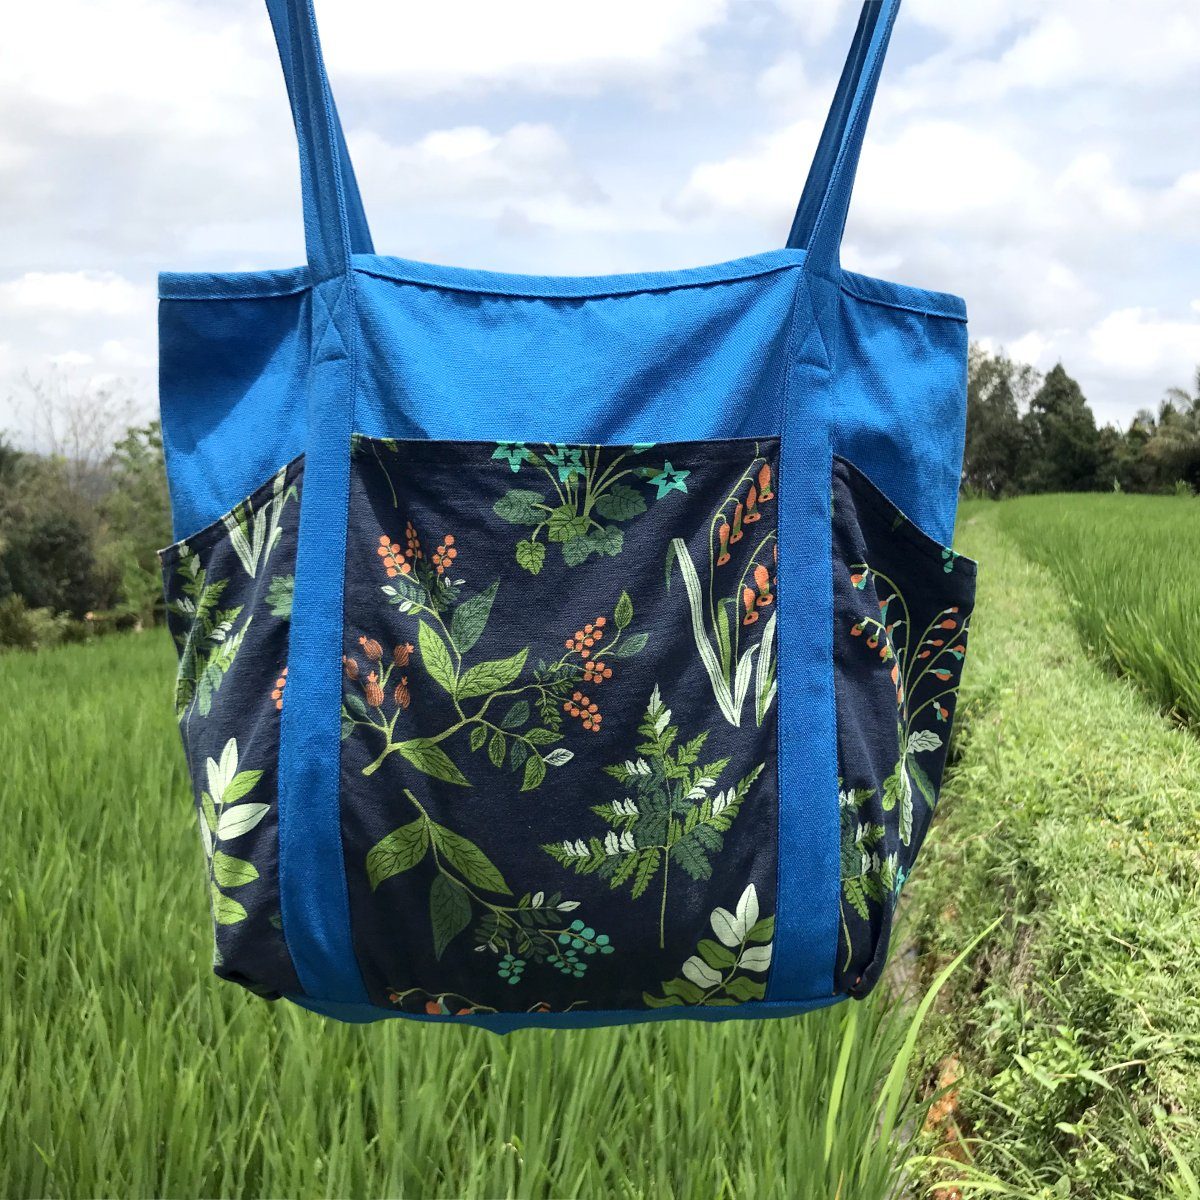 Blue Floral Plant Succulent Print Cotton Weekend Tote Bag with Pockets